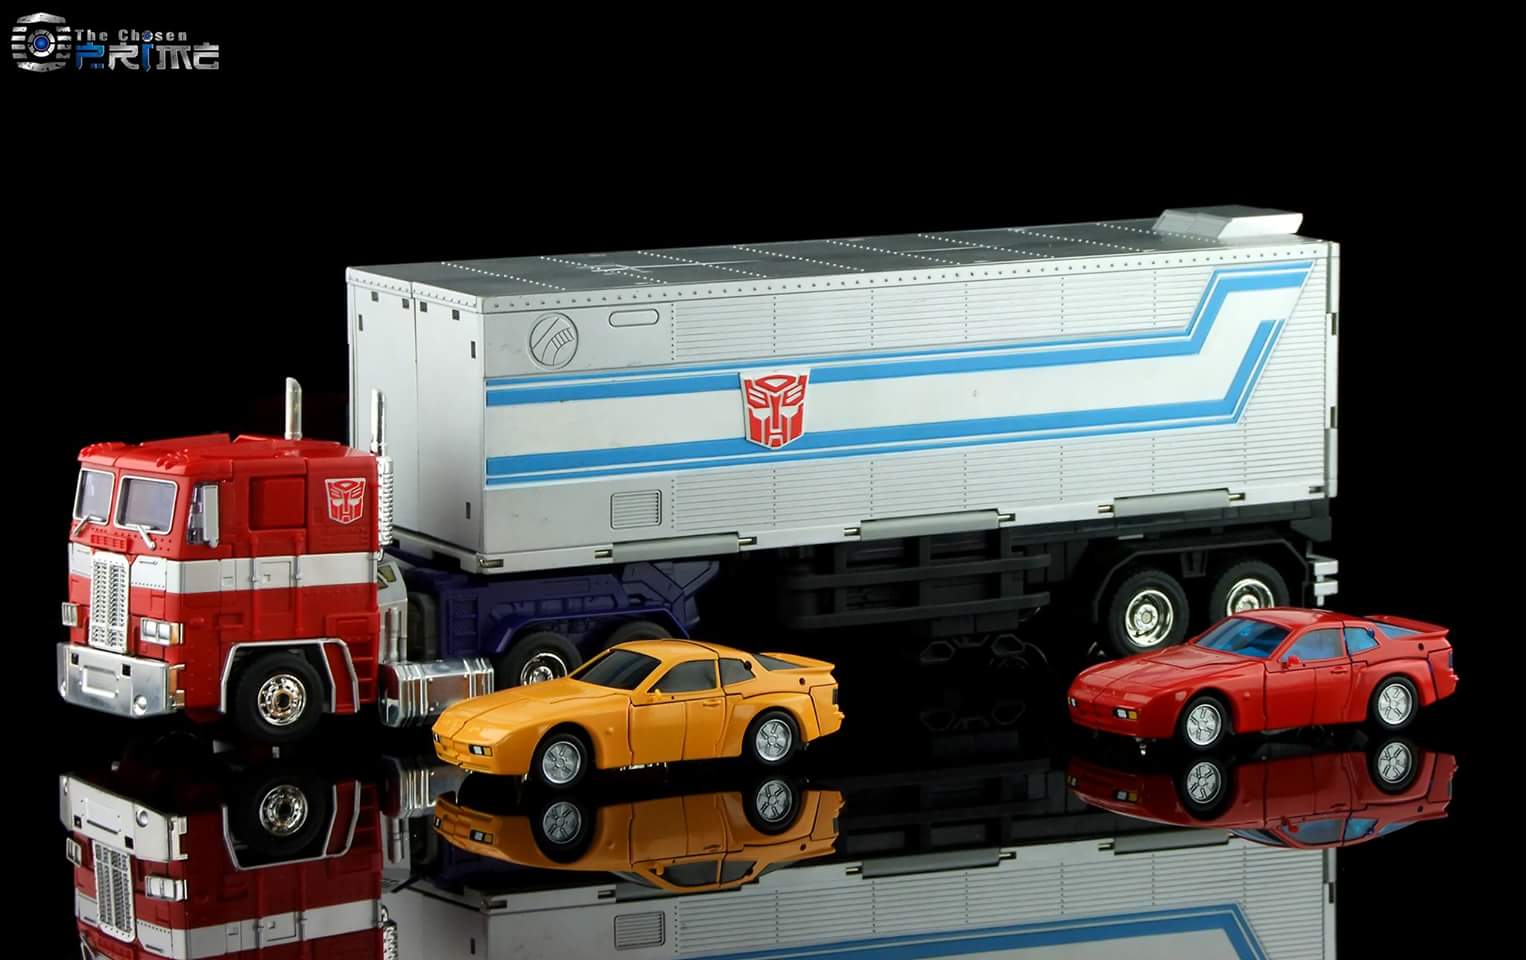 [ACE Collectables] Produit Tiers - Minibots MP - ACE-01 Tumbler (aka Cliffjumper/Matamore), ACE-02 Hiccups (aka Hubcap/Virevolto), ACE-03 Trident (aka Seaspray/Embruns) MJI8TTOQ